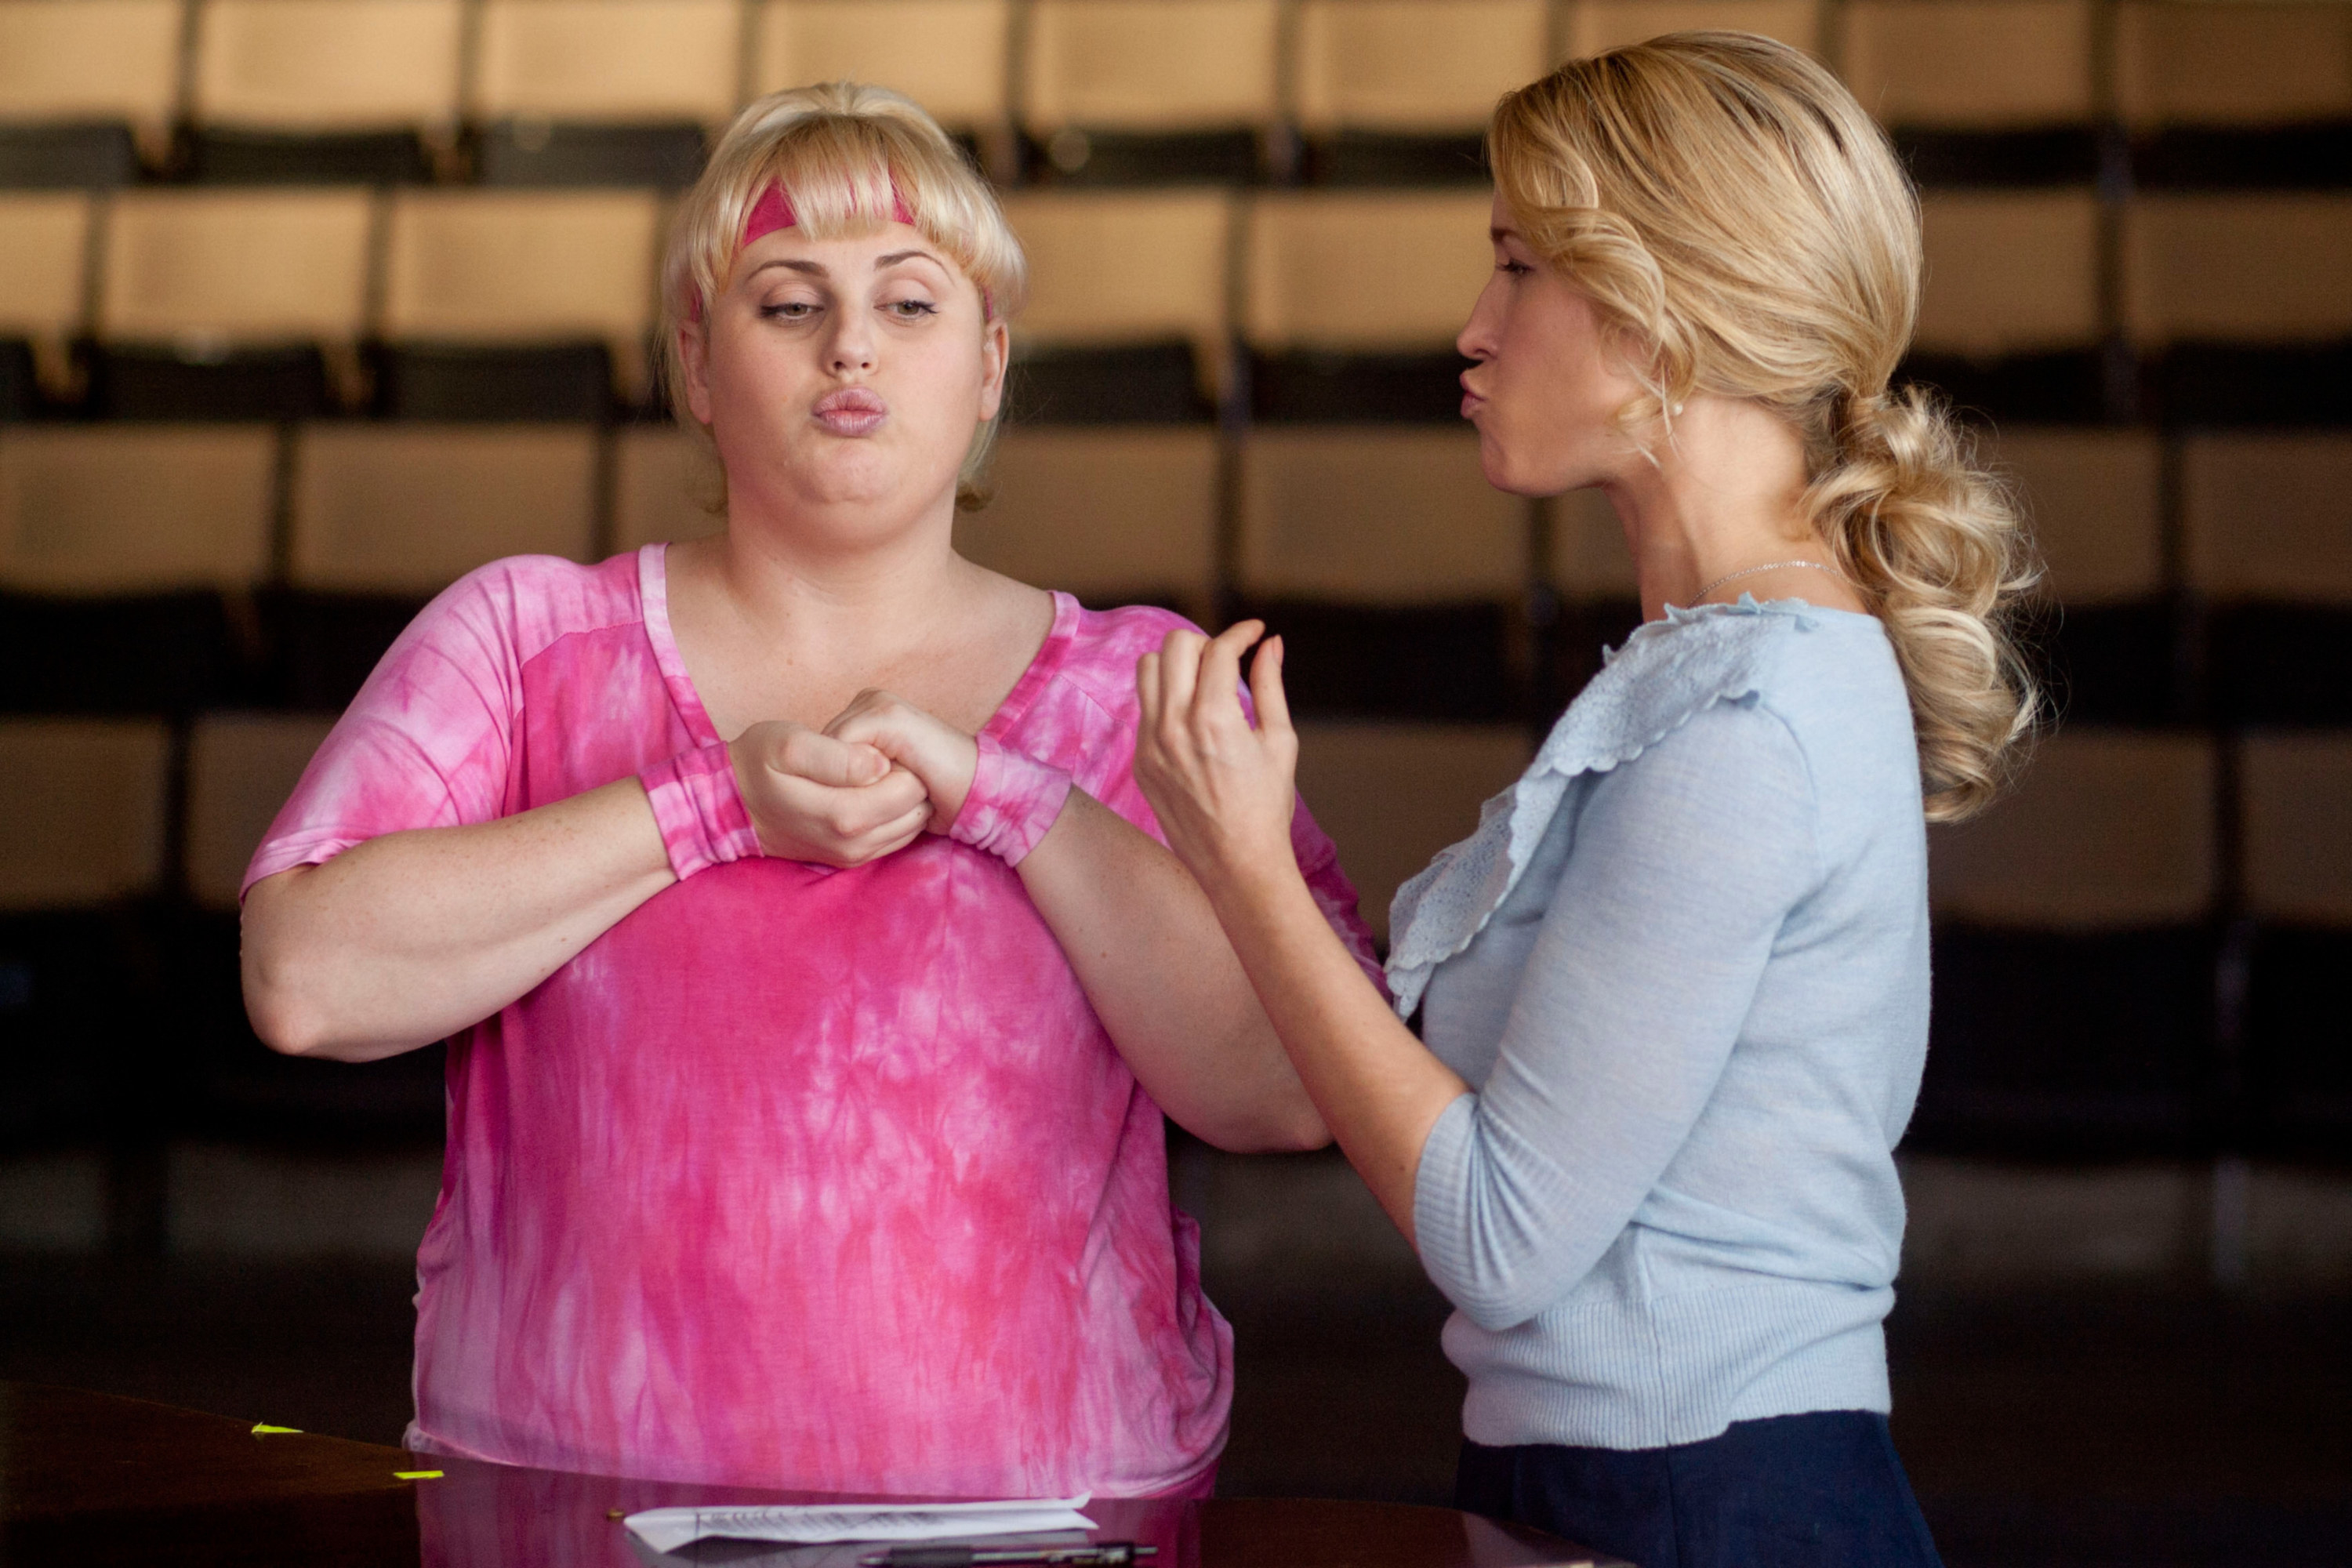 Rebel as Fat Amy with Anna Camp as Aubrey